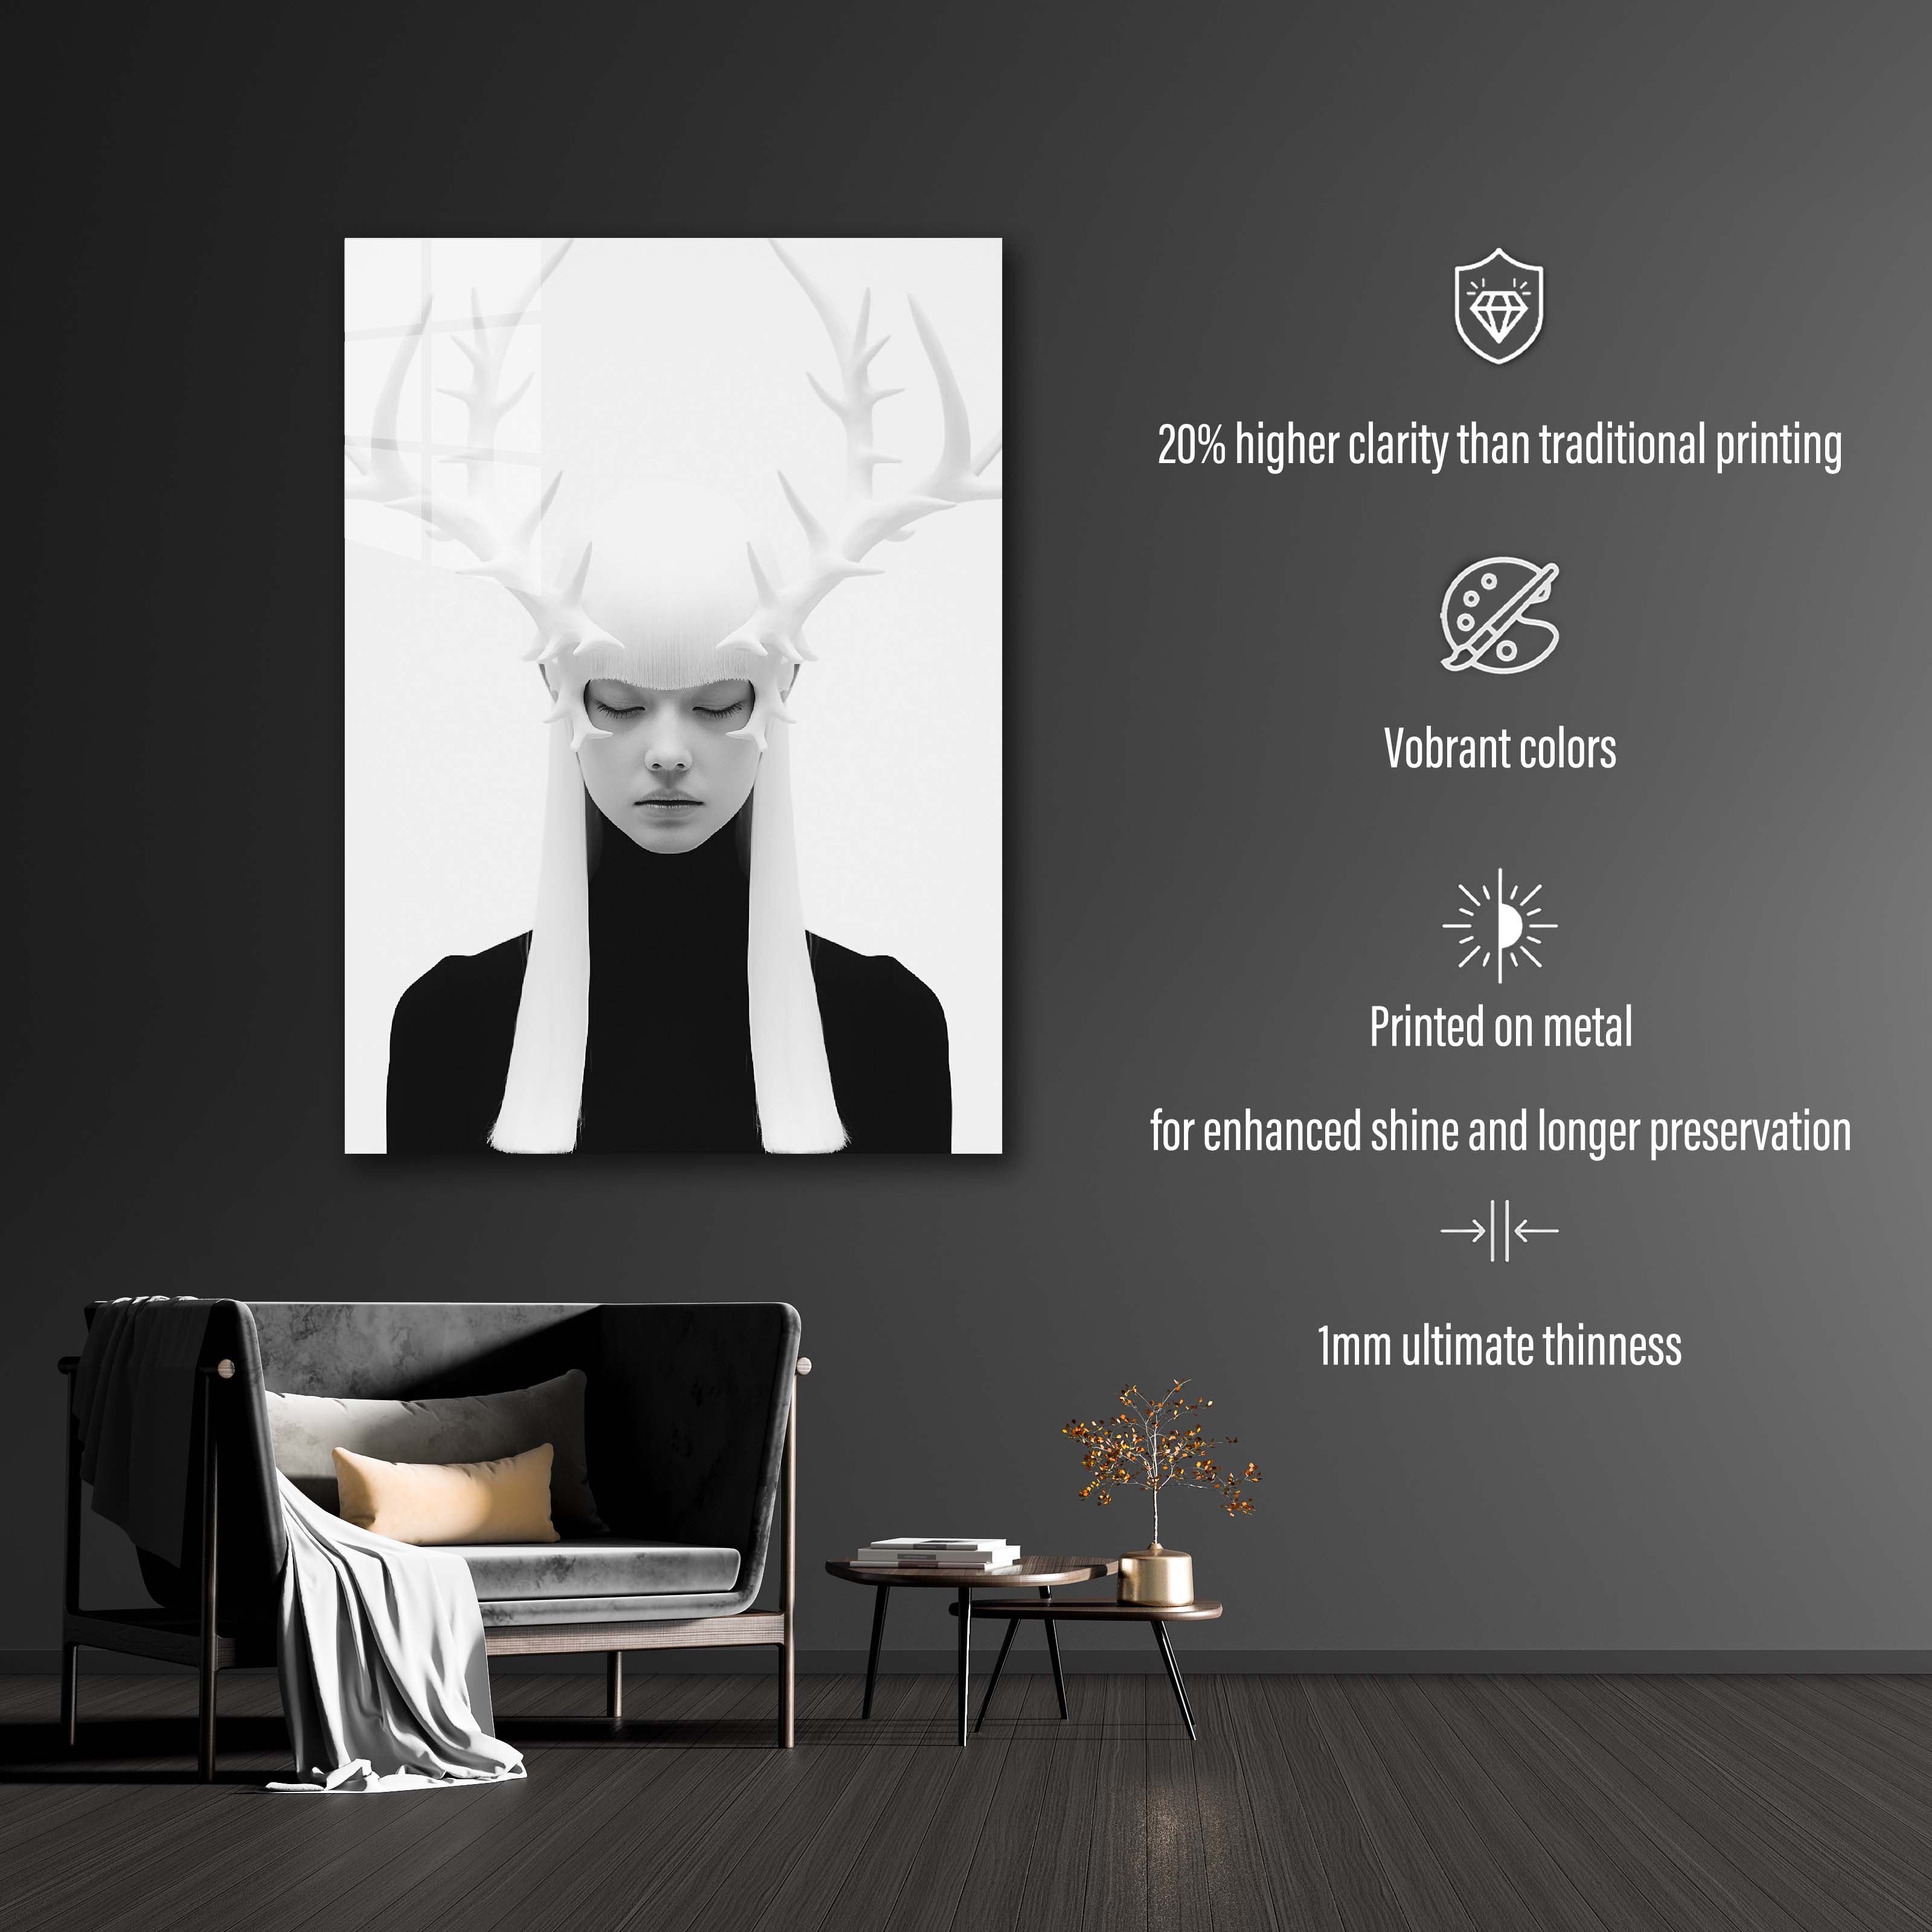 Woman With Antlers 1. White background.-designed by @VanessaGF